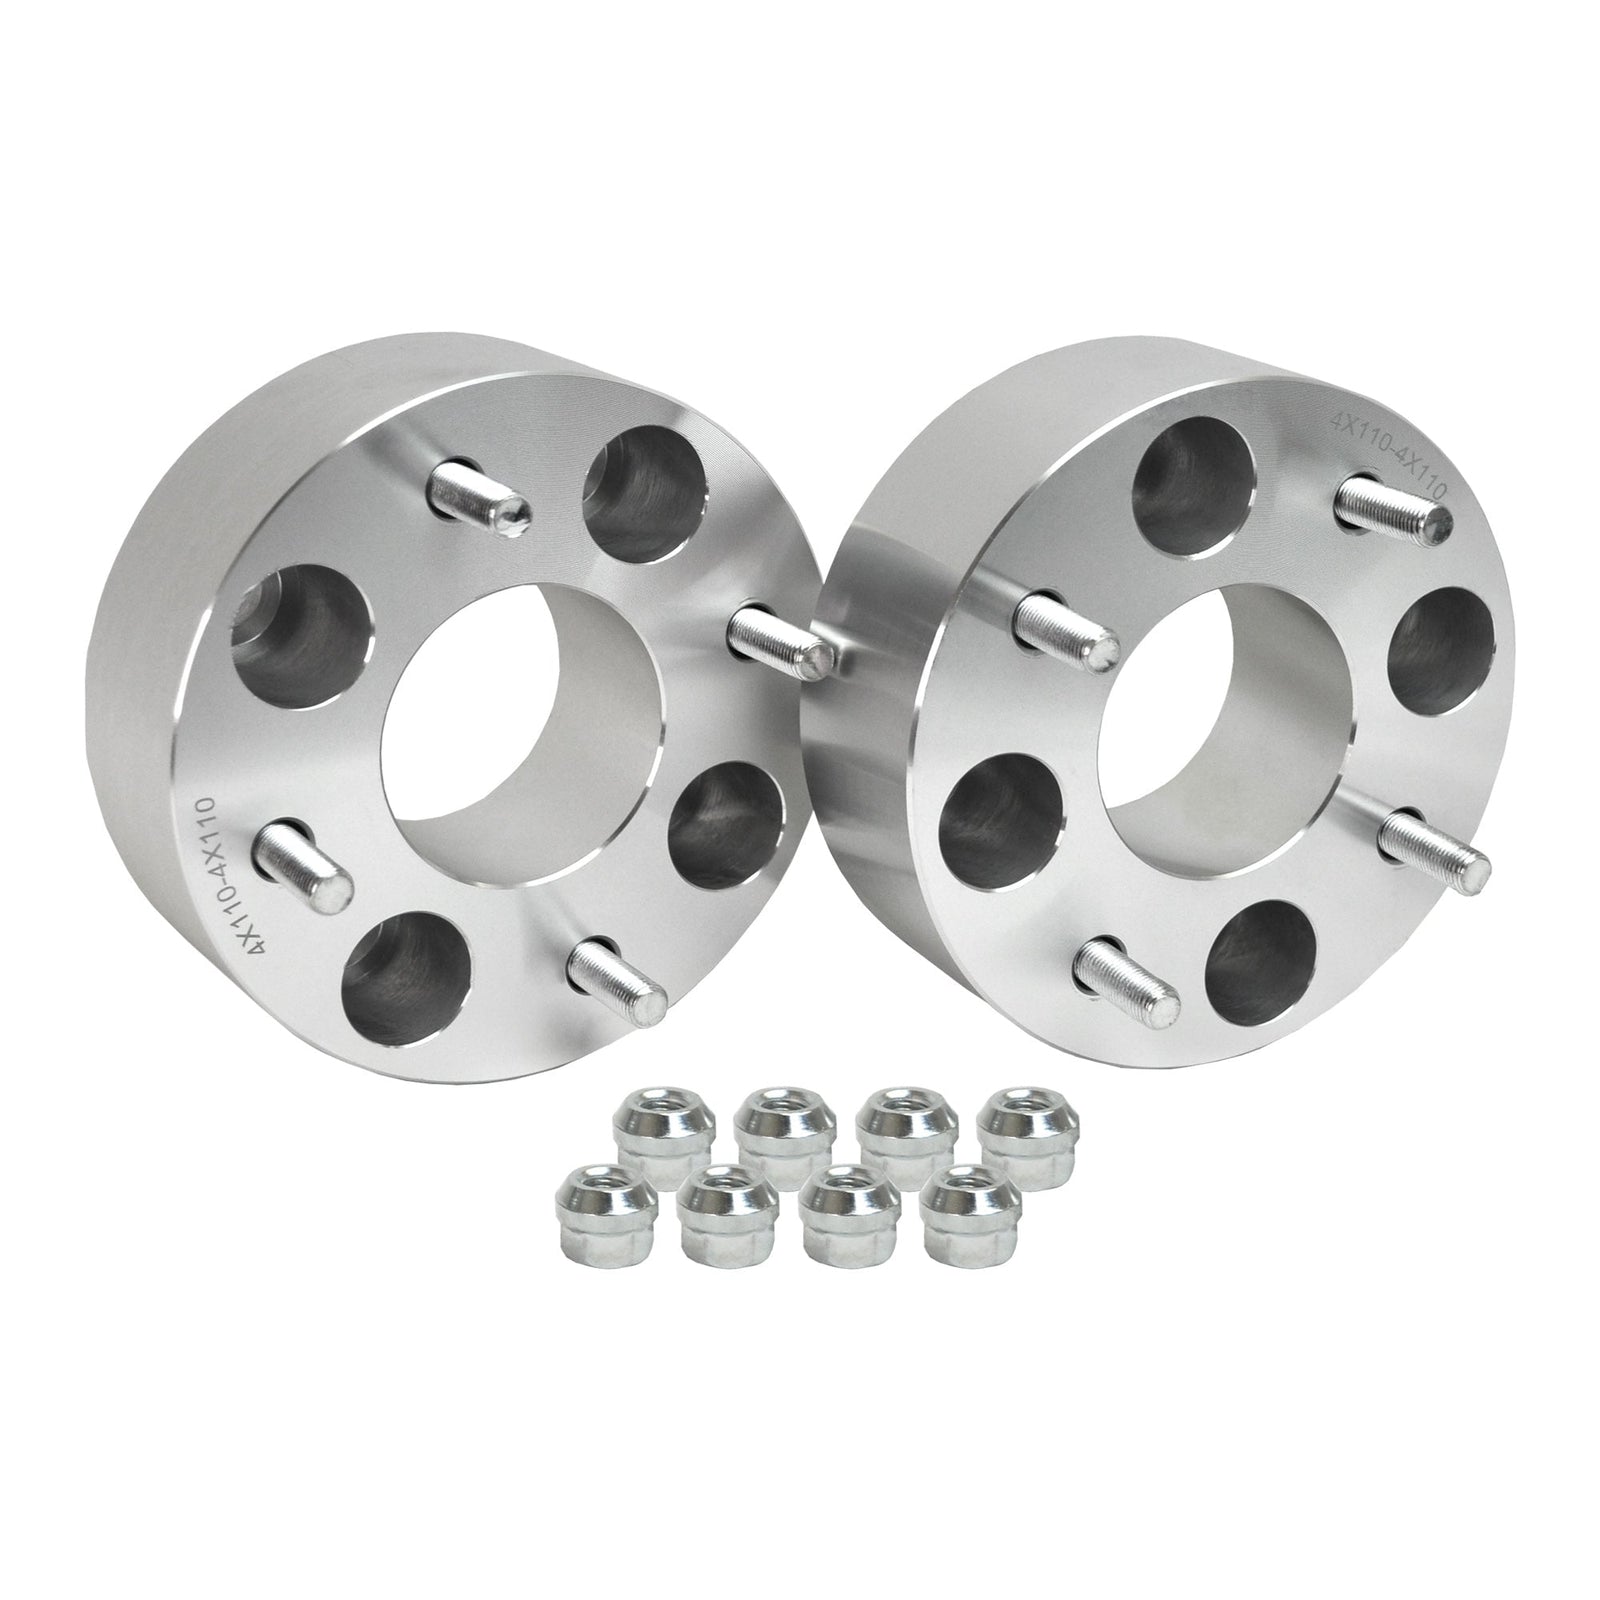 Arctic Cat Prowler 550 Rugged Wheel Spacer